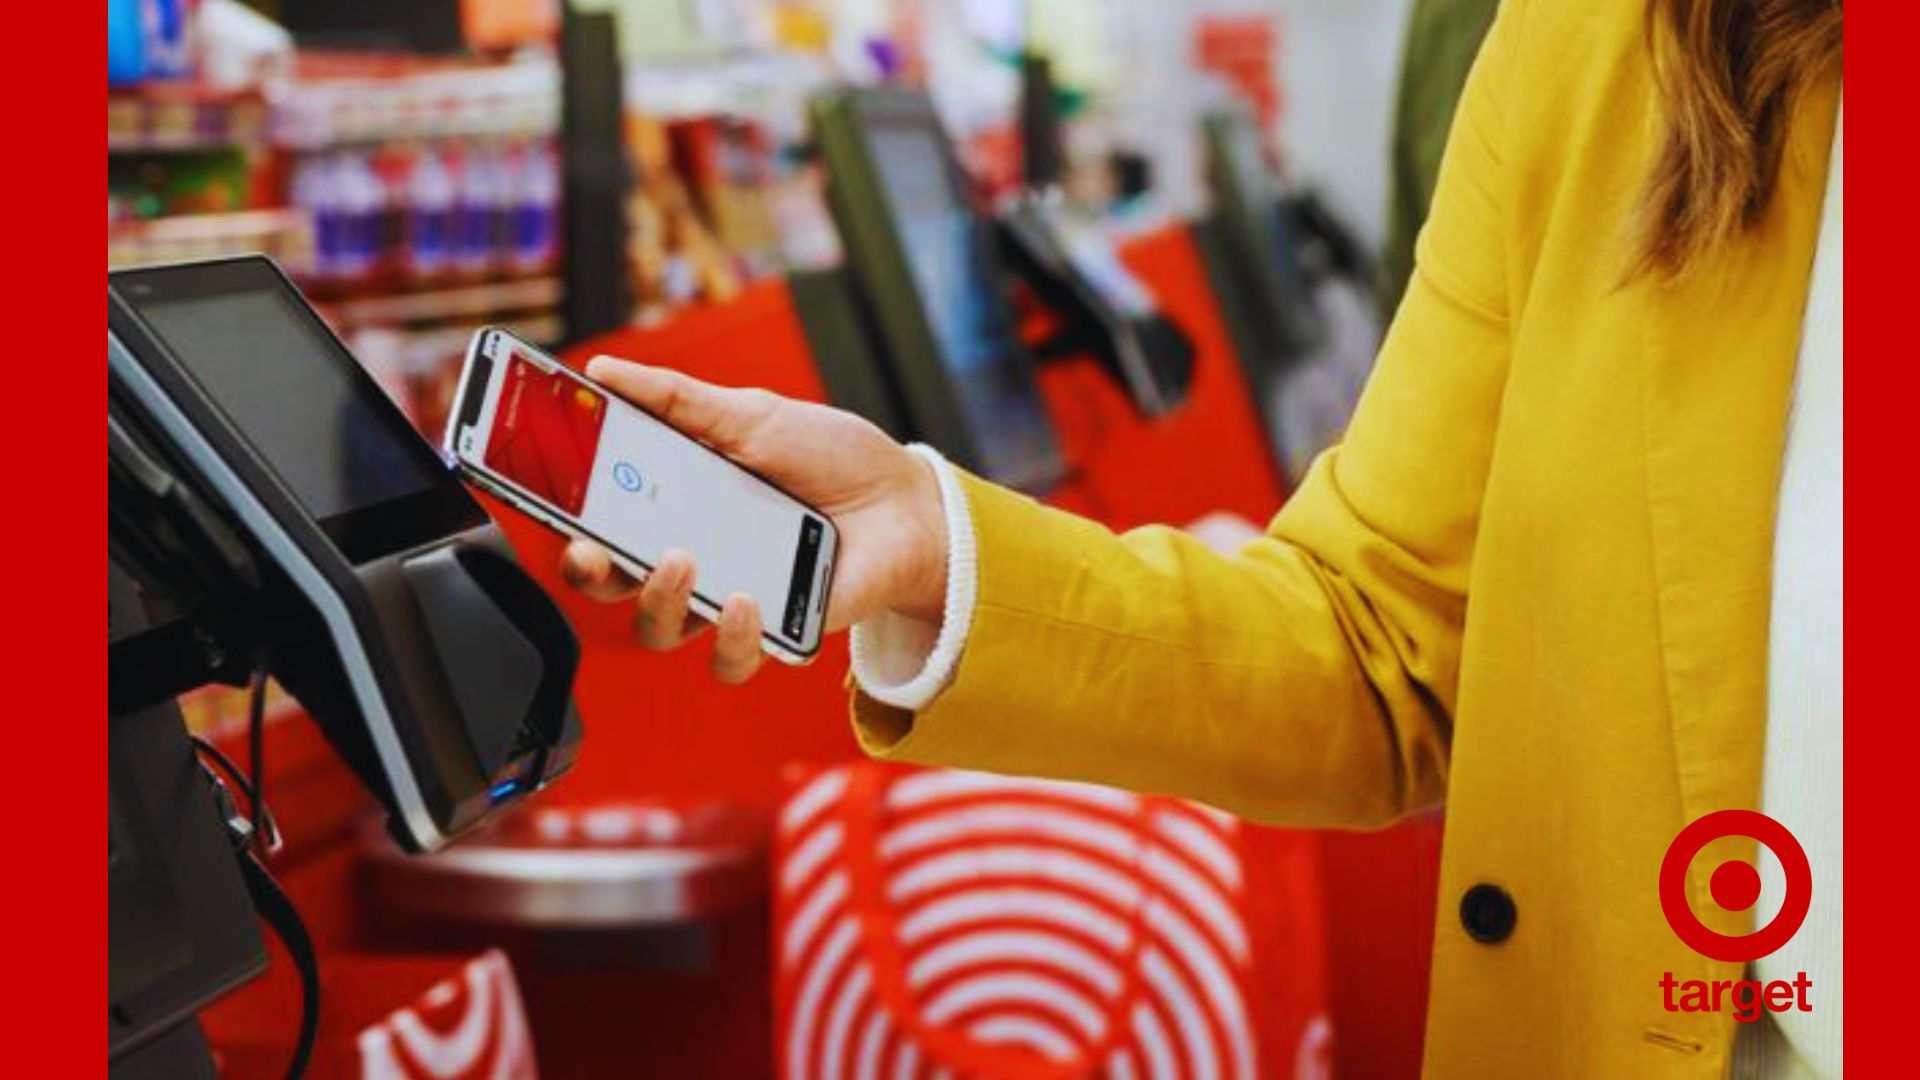 How to use Apple Pay at Target